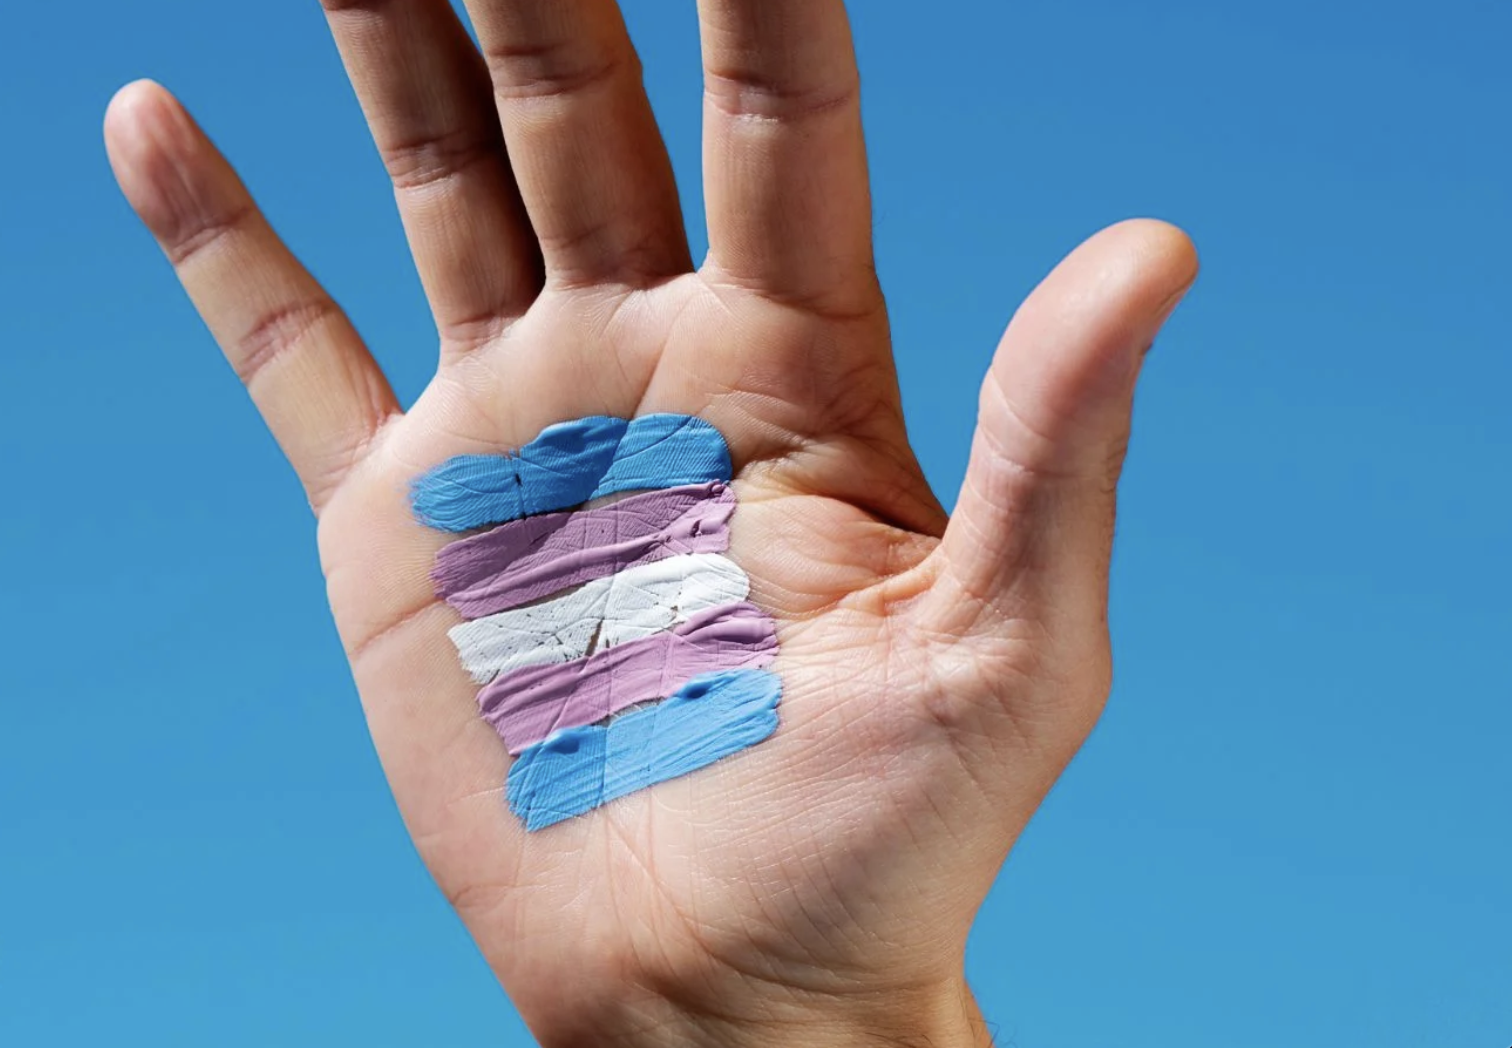 Transgender Pride flag painted on a palm with white skin with the palm filling the frame